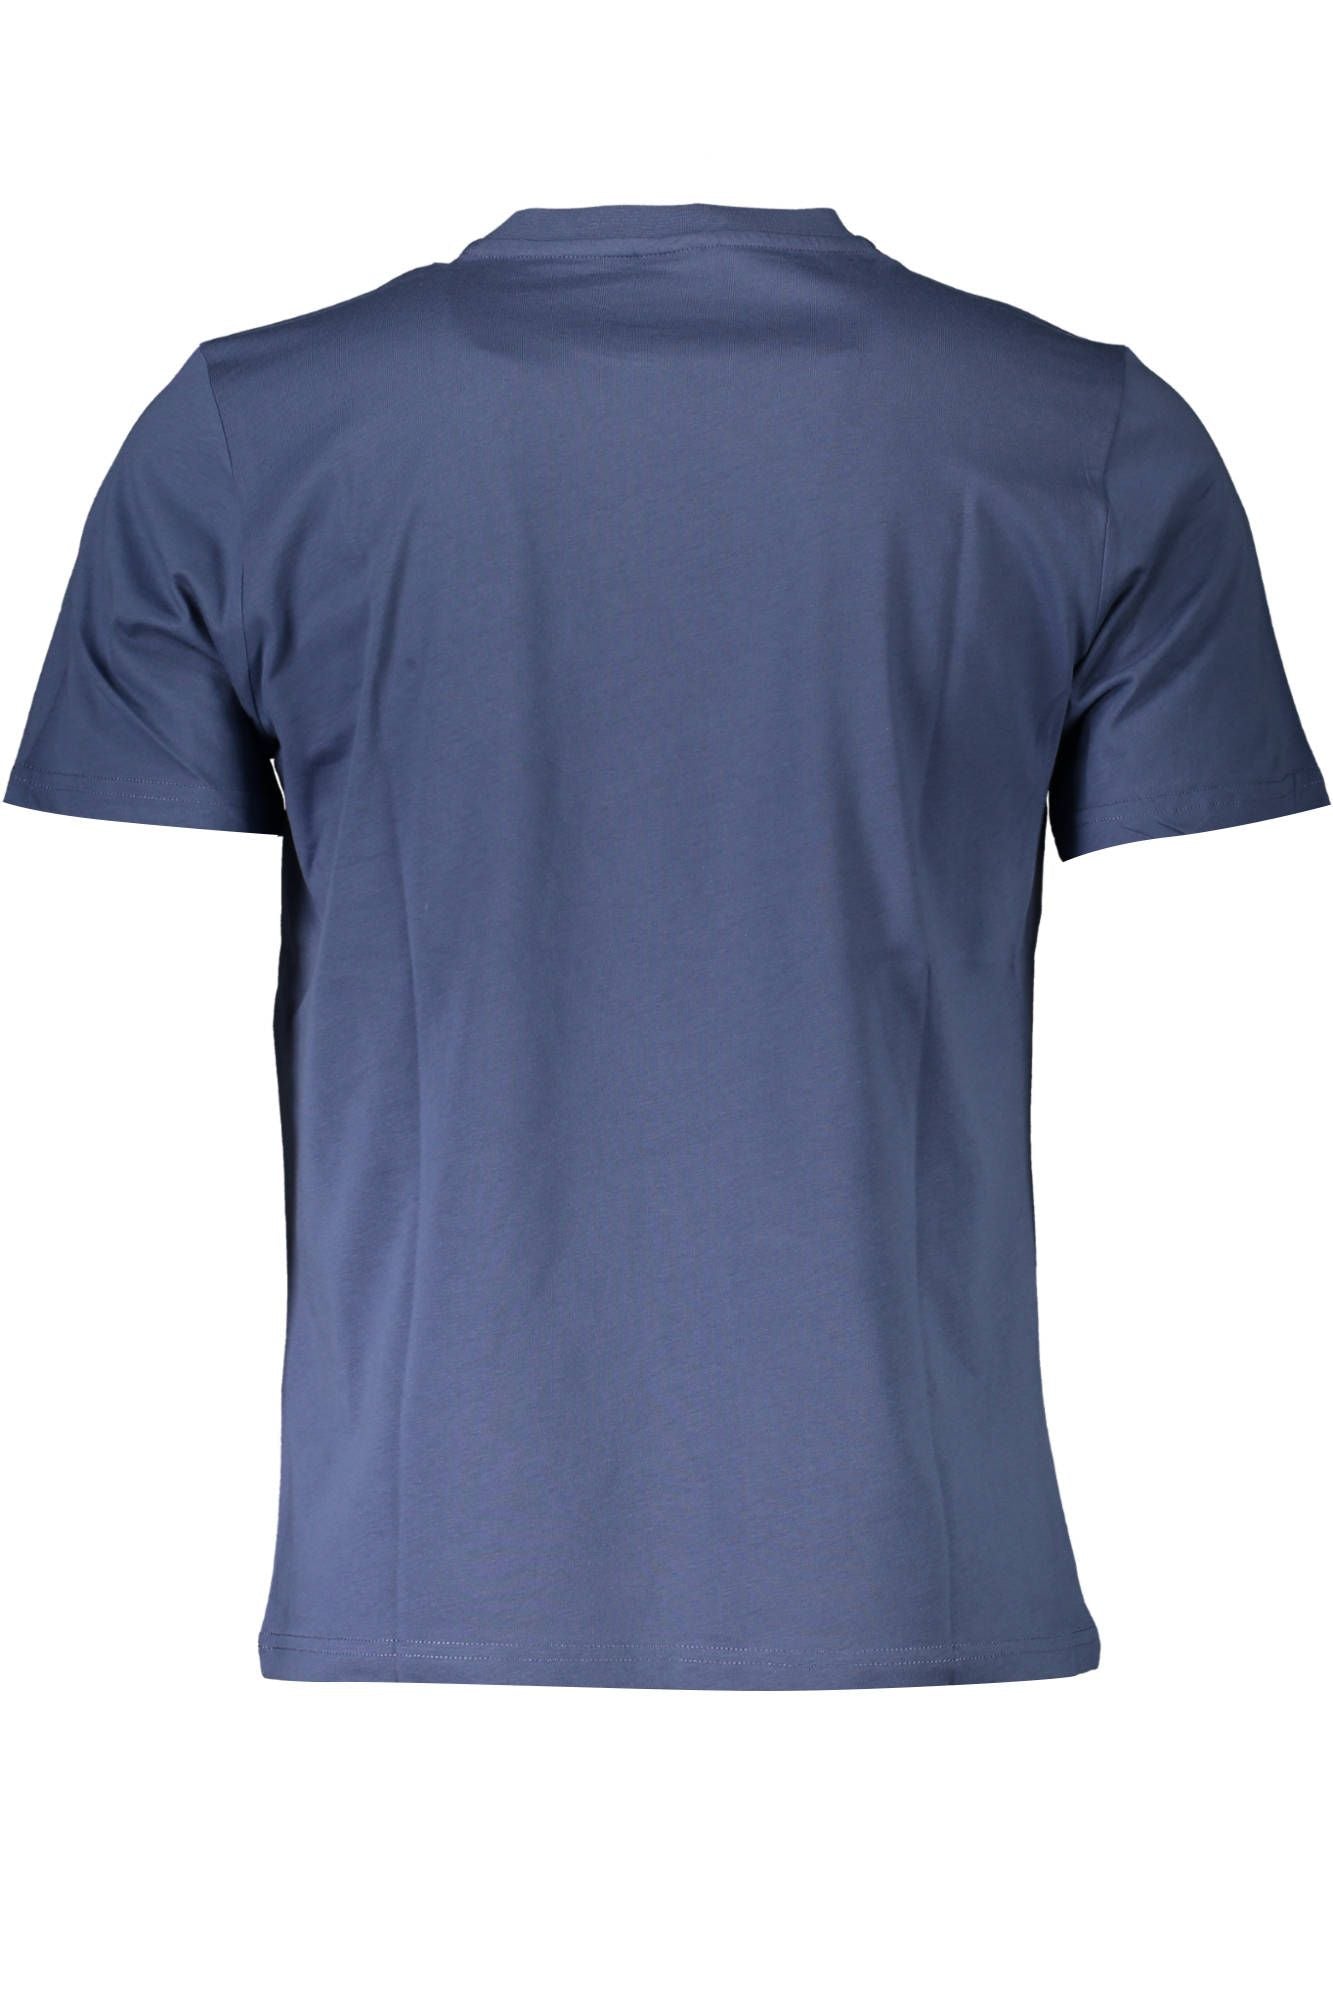 North Sails Blue Printed Round Neck Tee with Logo